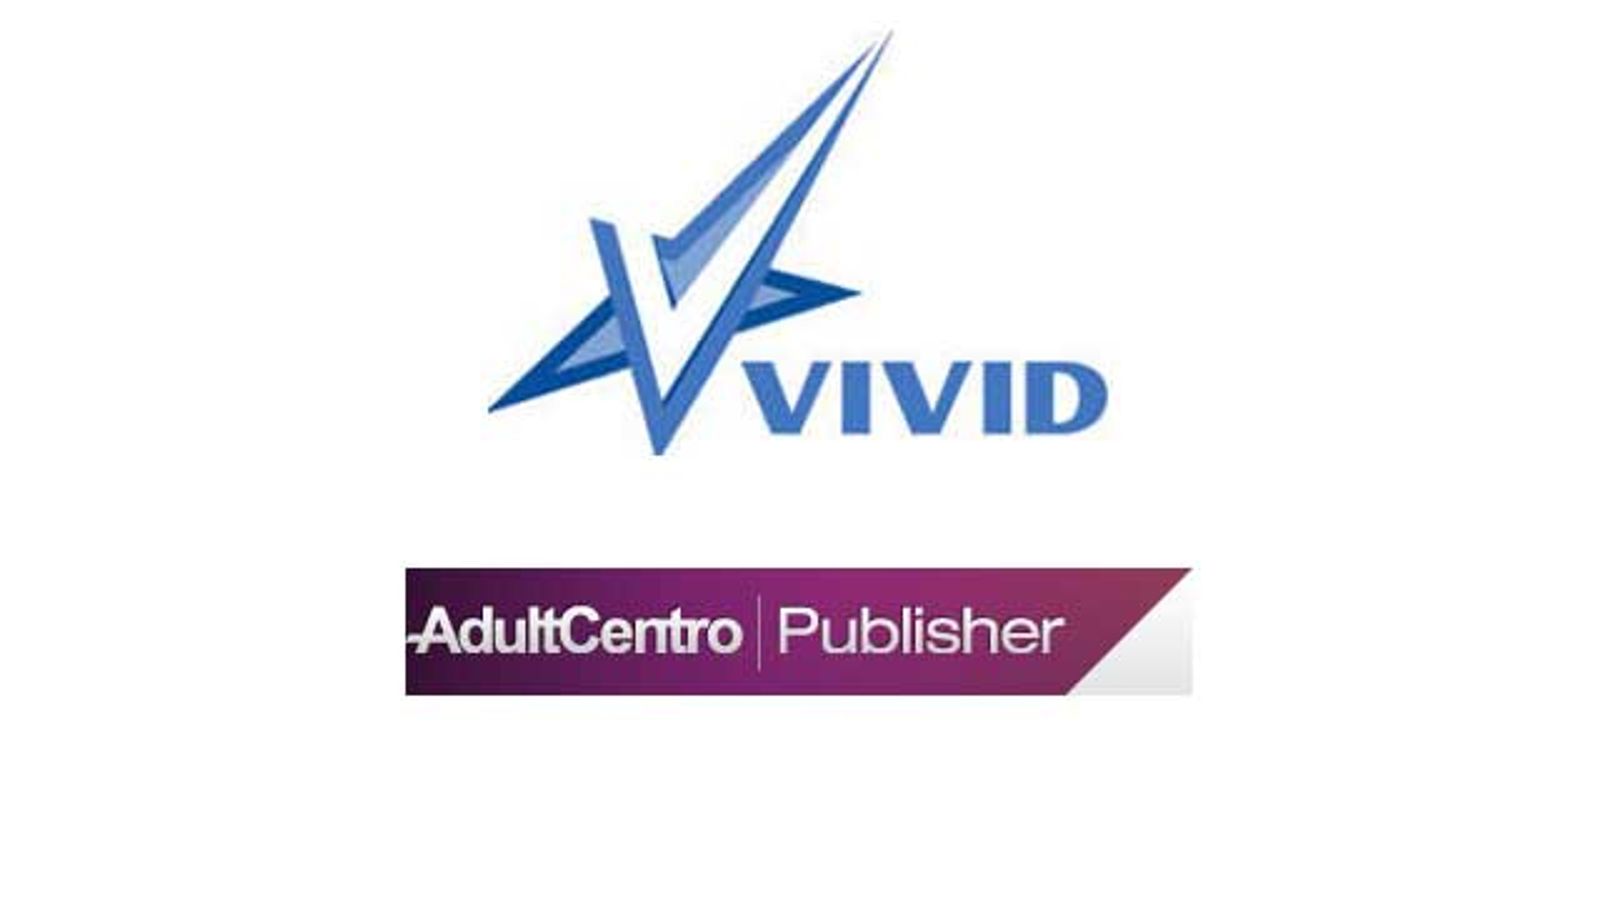 AdultCentro, Vivid Offer Vivid Feeds on AdultCentro Publisher